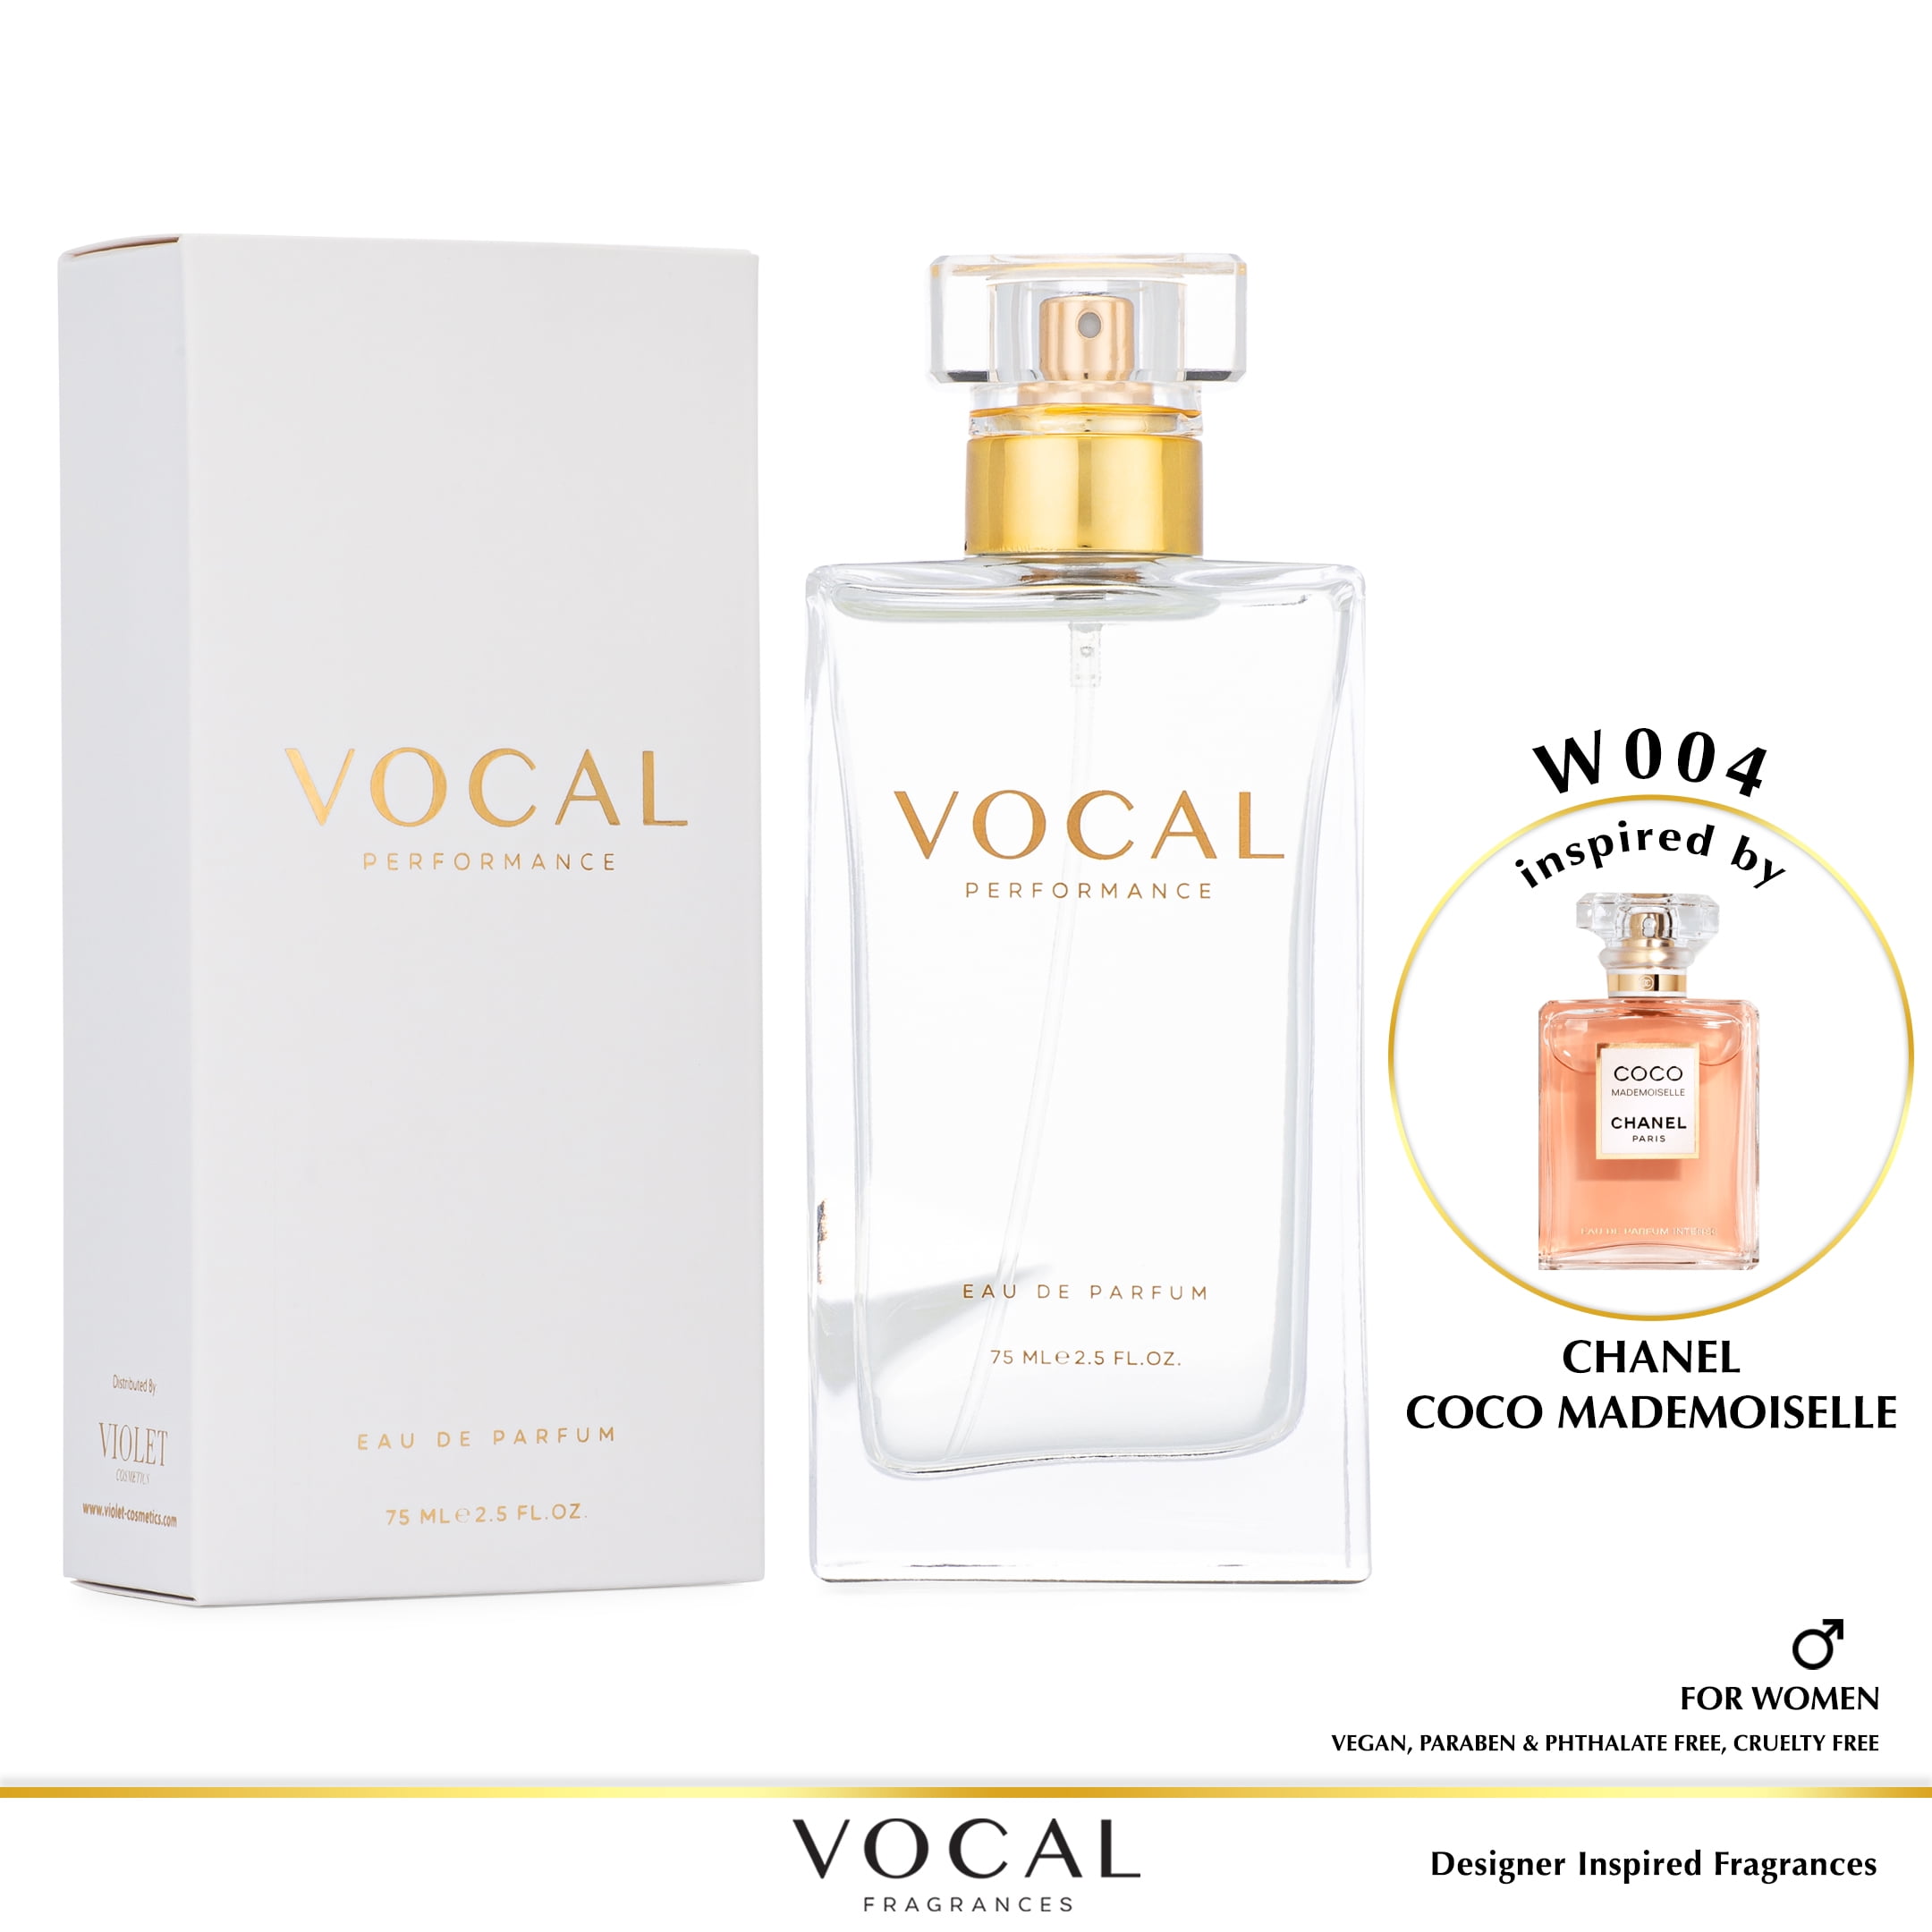 Vocal Fragrance Inspired by Chanel Coco Mademoiselle Eau de Parfum For  Women 2.5 FL. OZ. 75 ml. Vegan, Paraben & Phthalate Free Never Tested on  Animals 